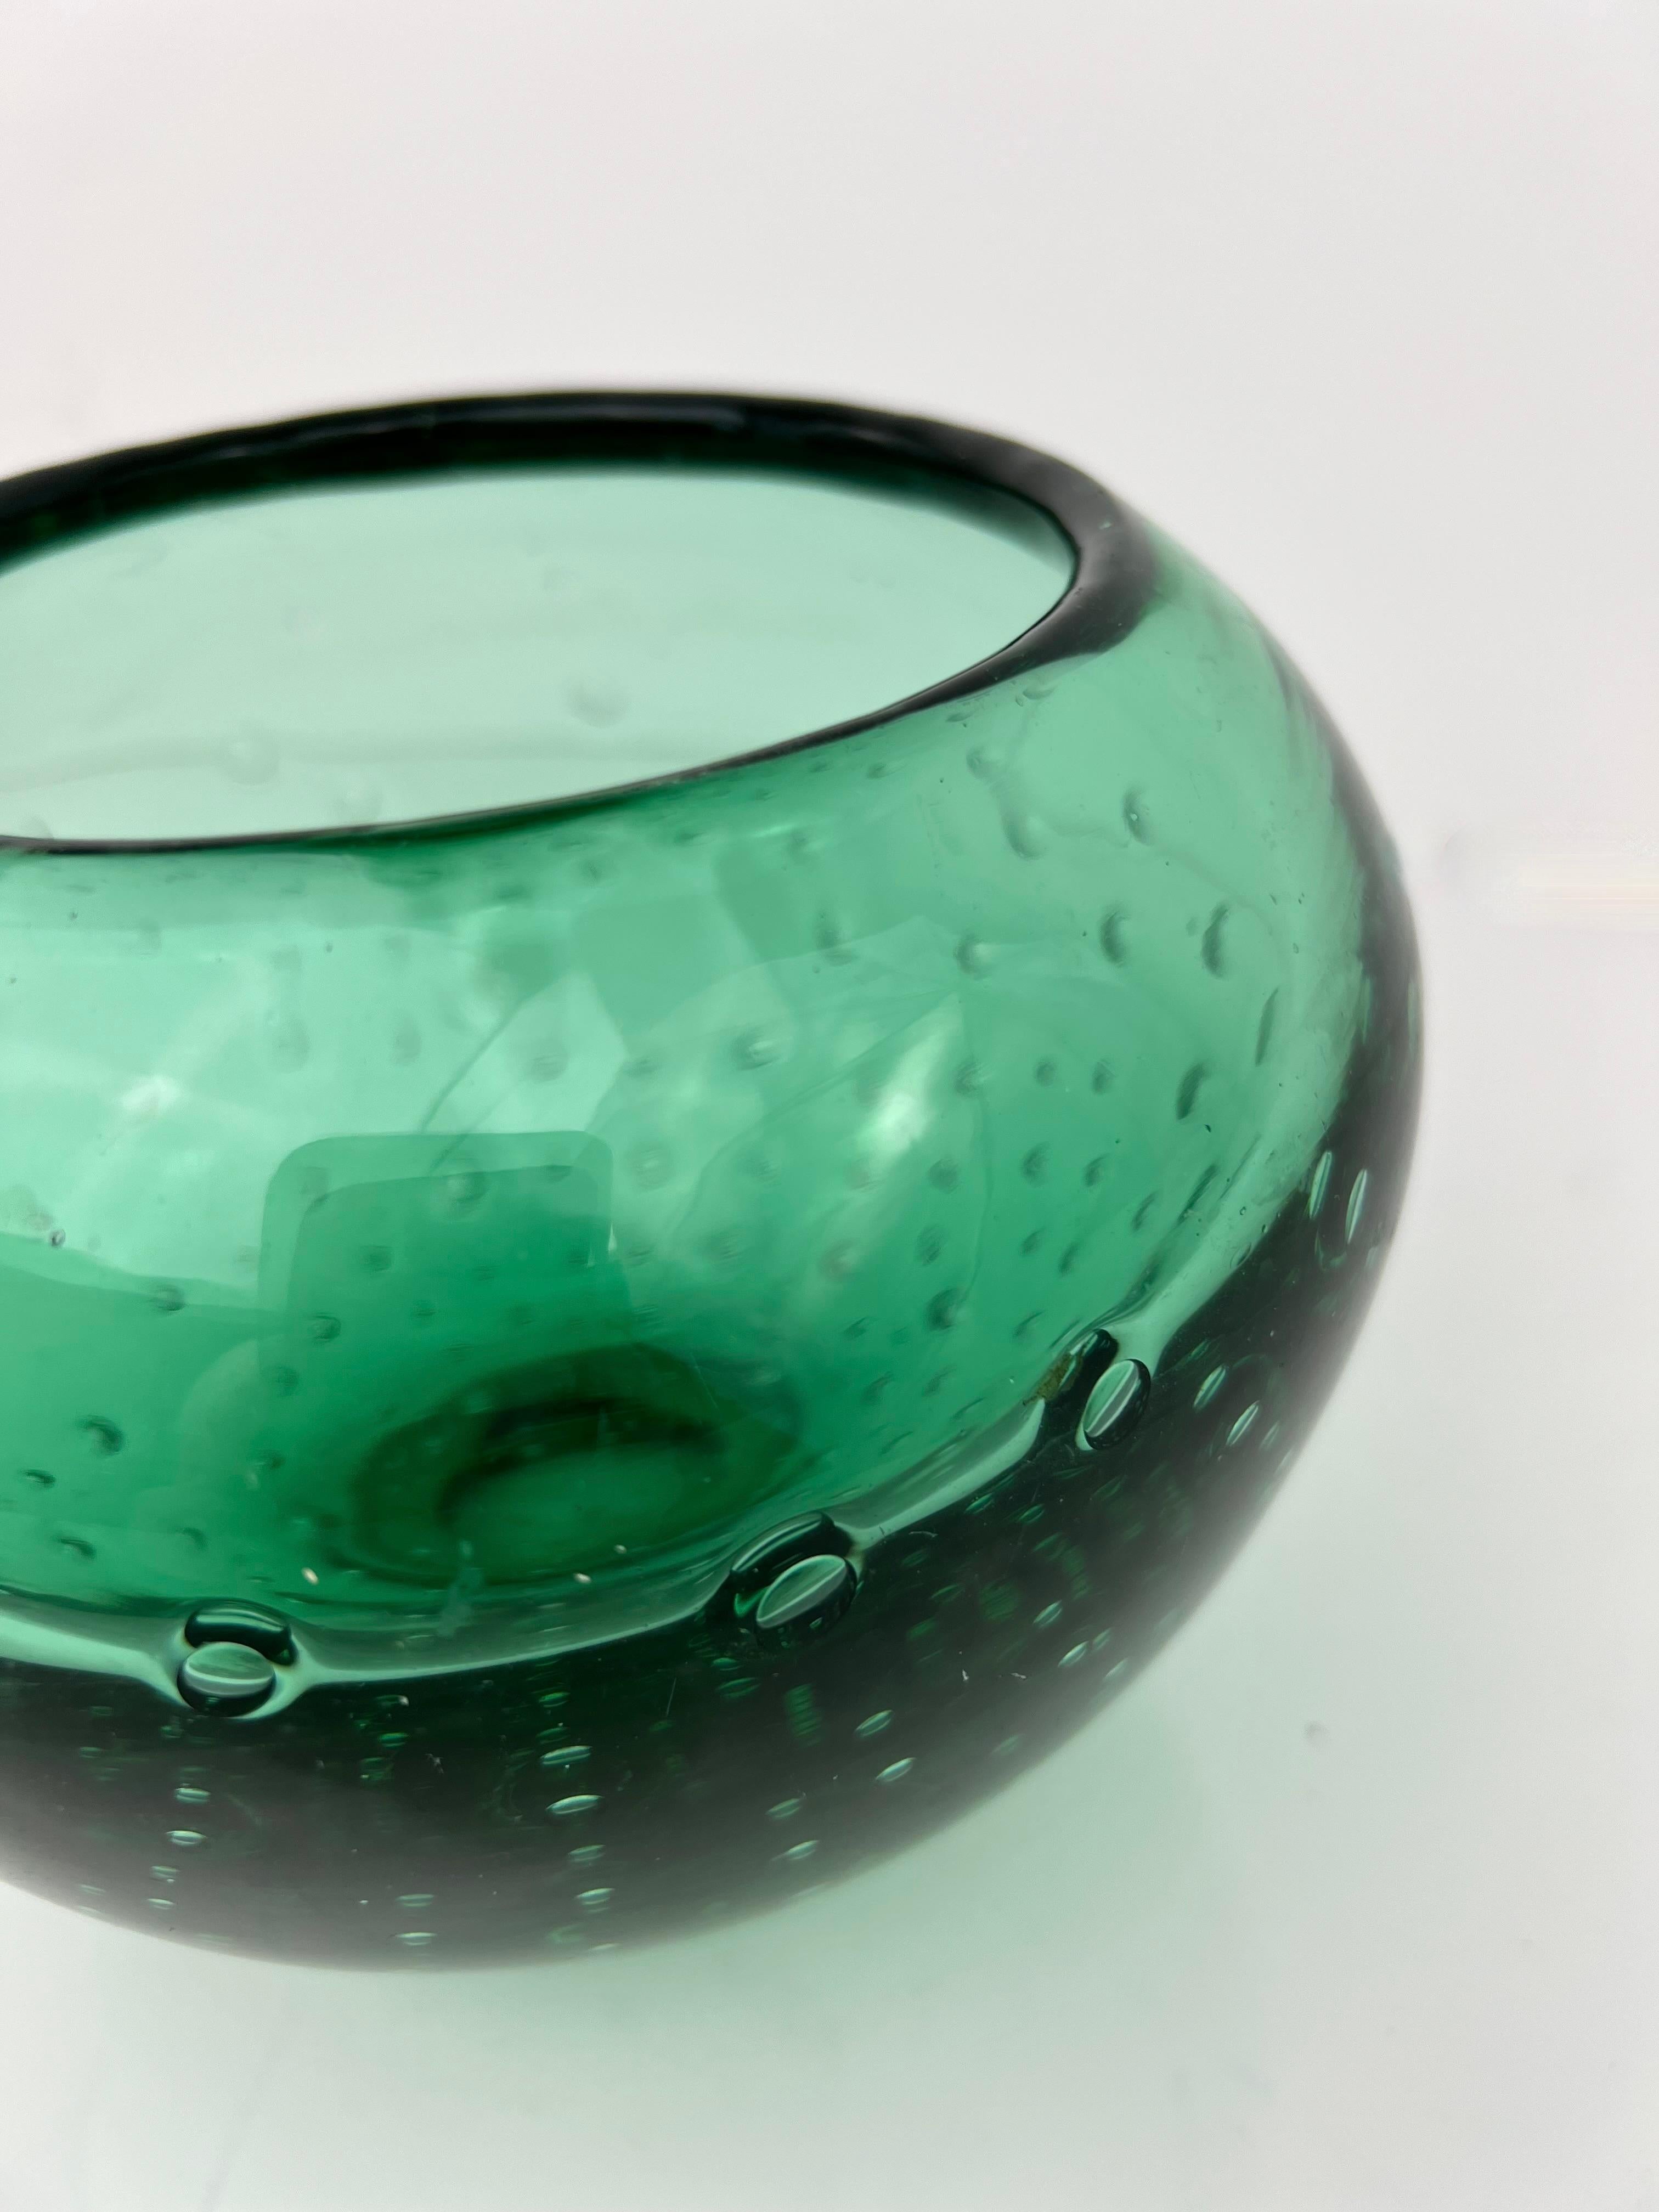 Stunning, heavy Mid Century controlled bubble decorative bowl /vase in Green by Blenko artist, Carl Erickson (1899-1966) for his company Erickson Glass (1943-1961).  Erickson glass was well known for its green glass controlled bubble line and these